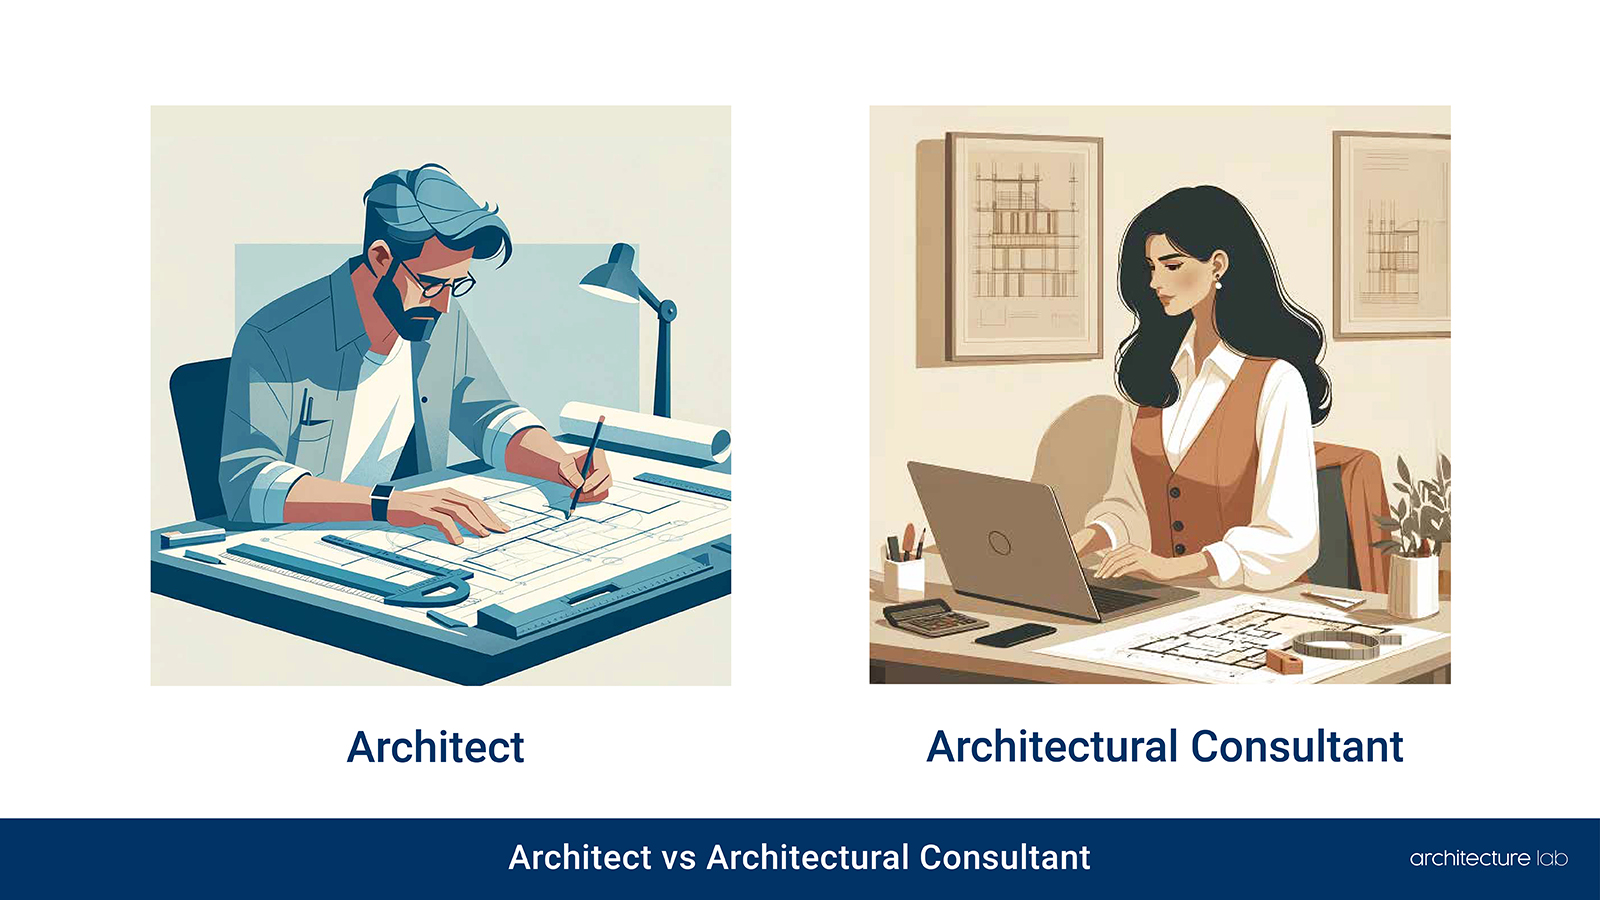 Architect vs. Architectural consultant: differences, similarities, duties, salaries, and education